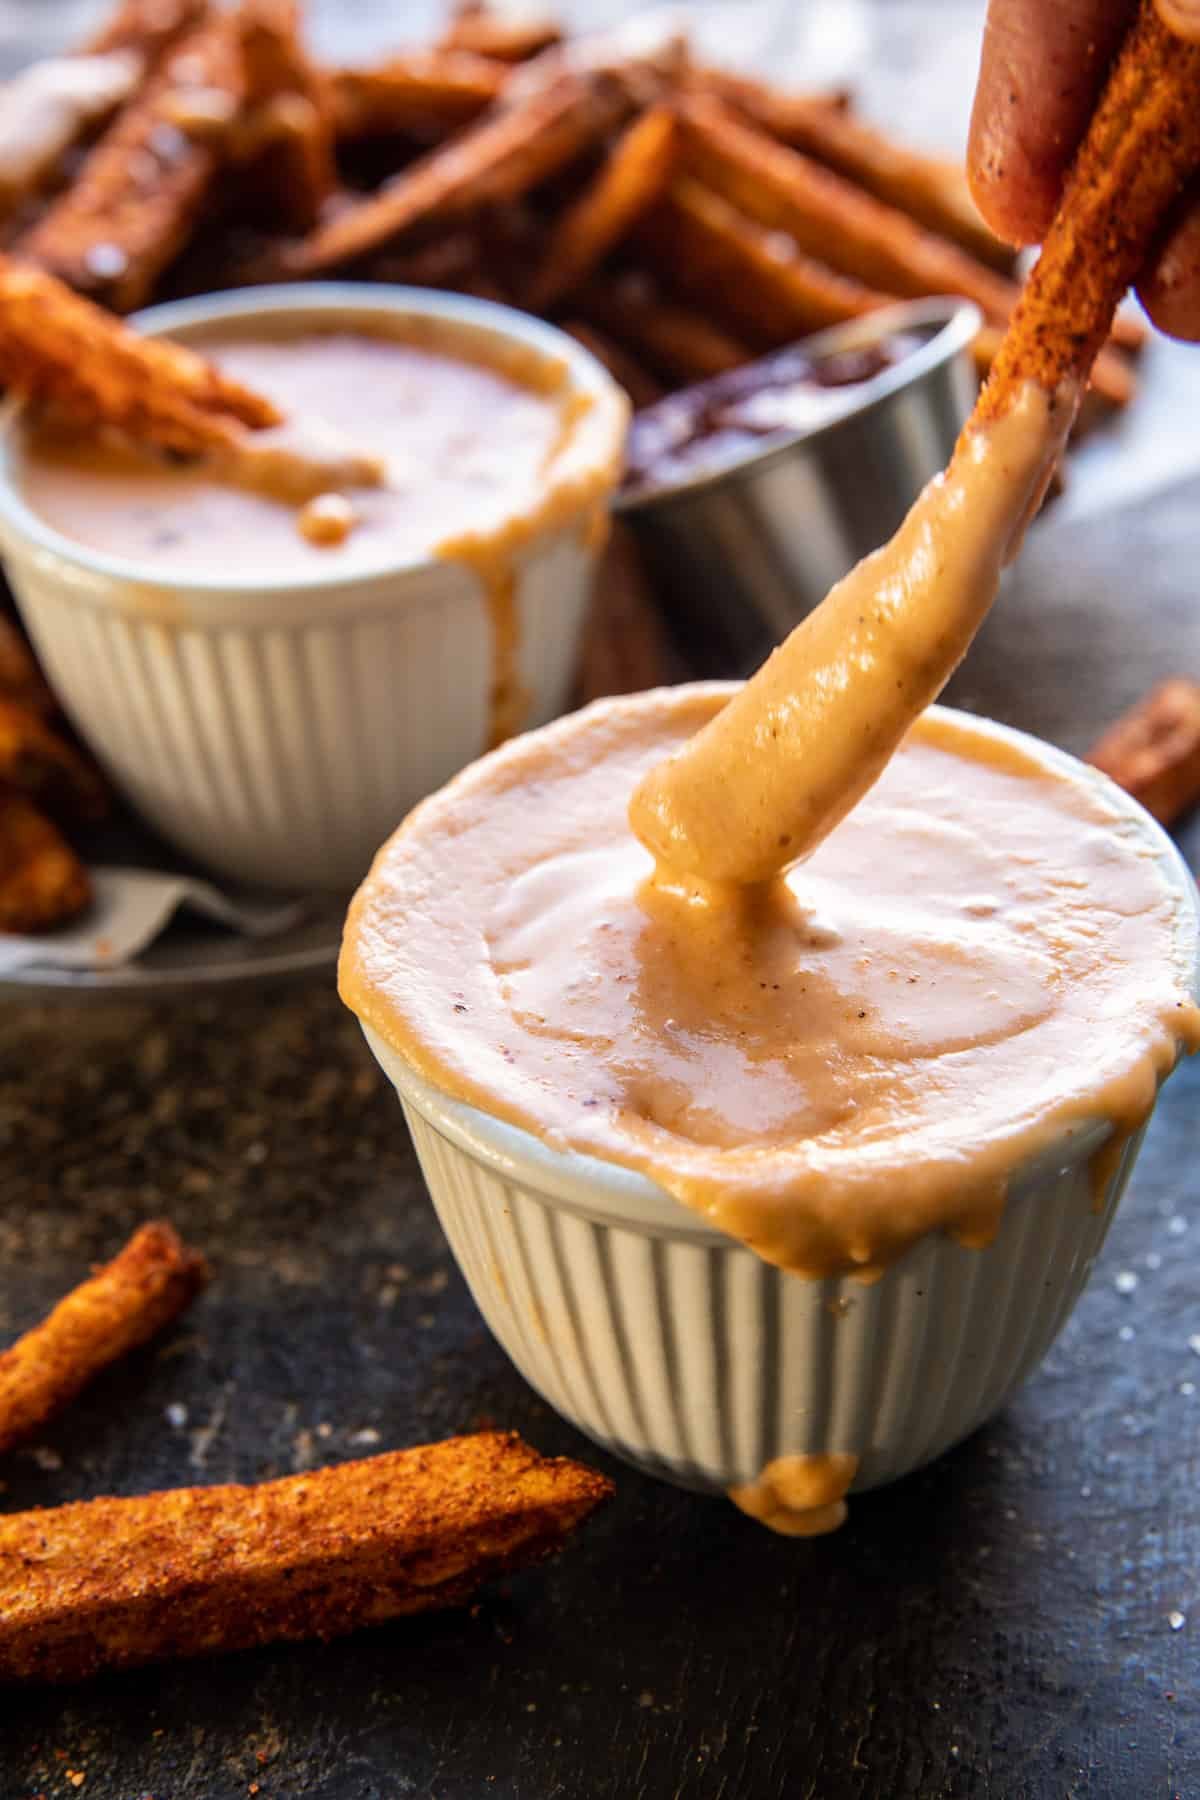 Nacho Fries with Chipotle Queso | halfbakedharvest.com